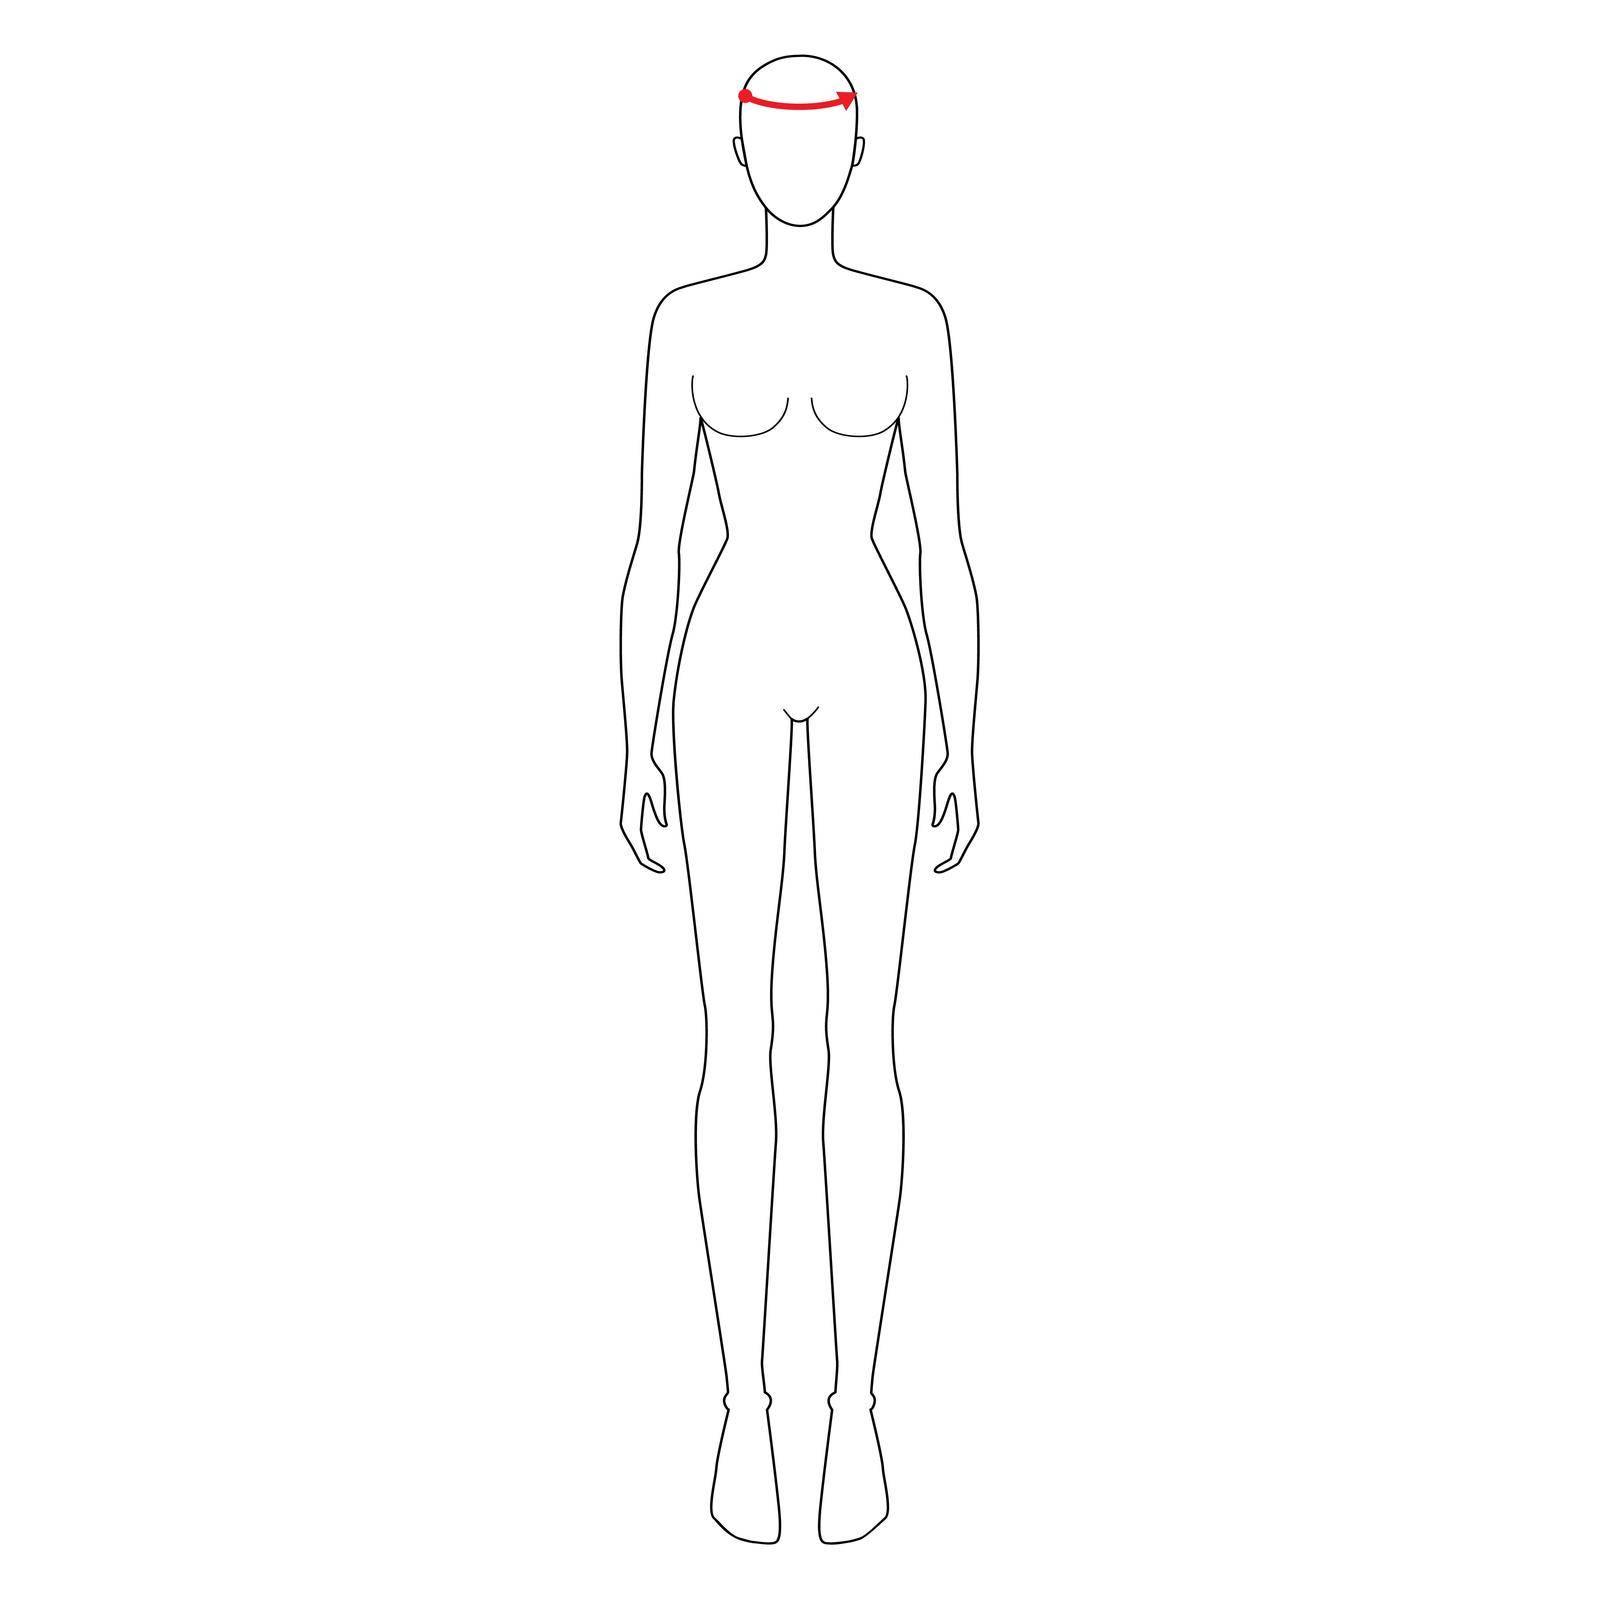 Women to do head measurement fashion Illustration for size chart. 7.5 head size girl for site or online shop. Human body infographic template for clothes.